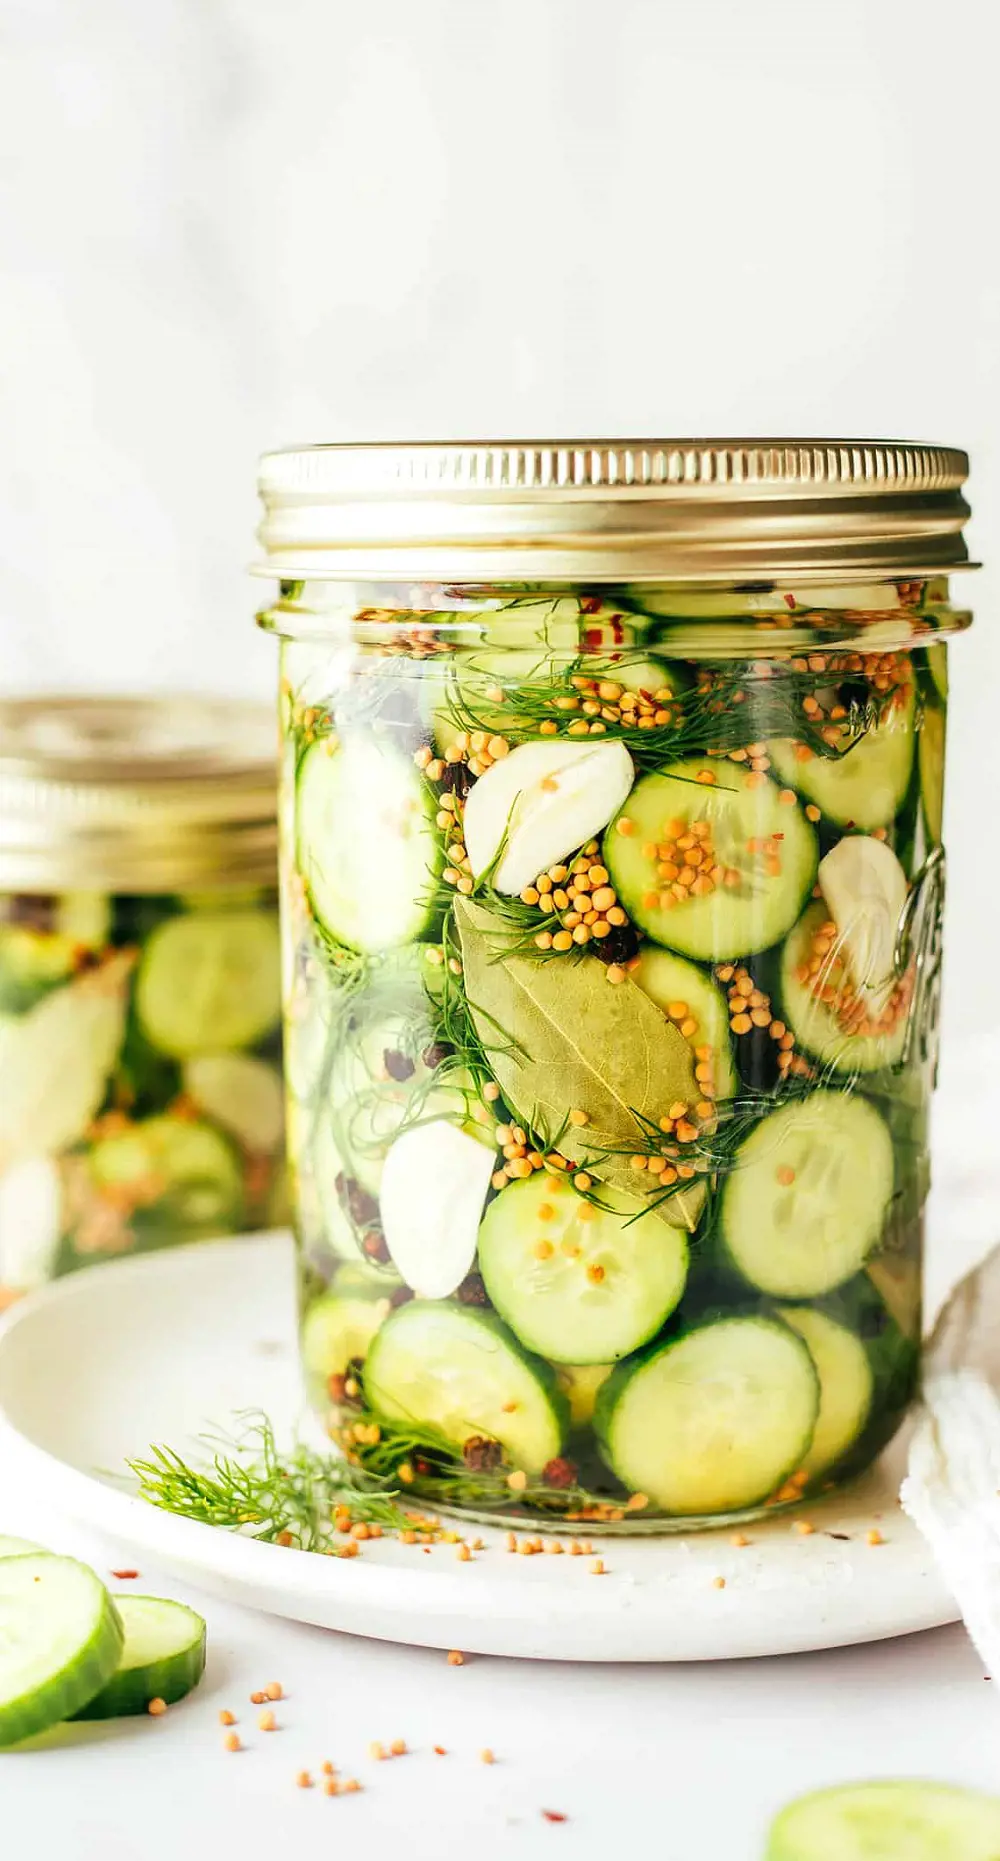 Pickles help to enhance gut-friendly bacteria, increase immunity power and improve digestion